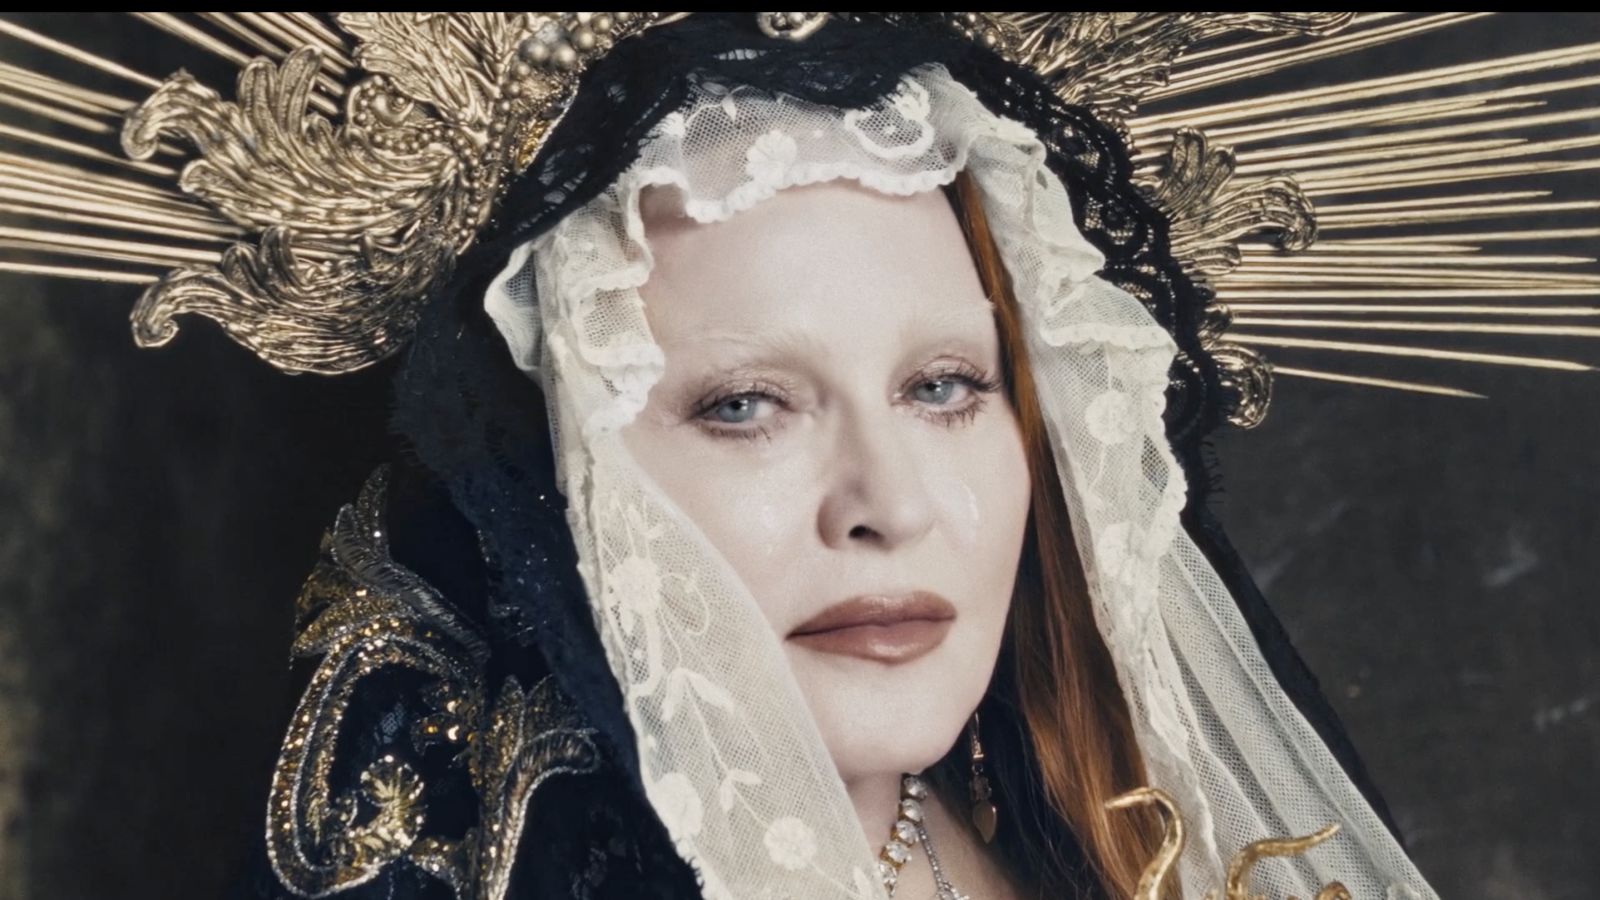 Madonna - The Enlightenment video by Luigi and Iango for Vanity Fair Europe